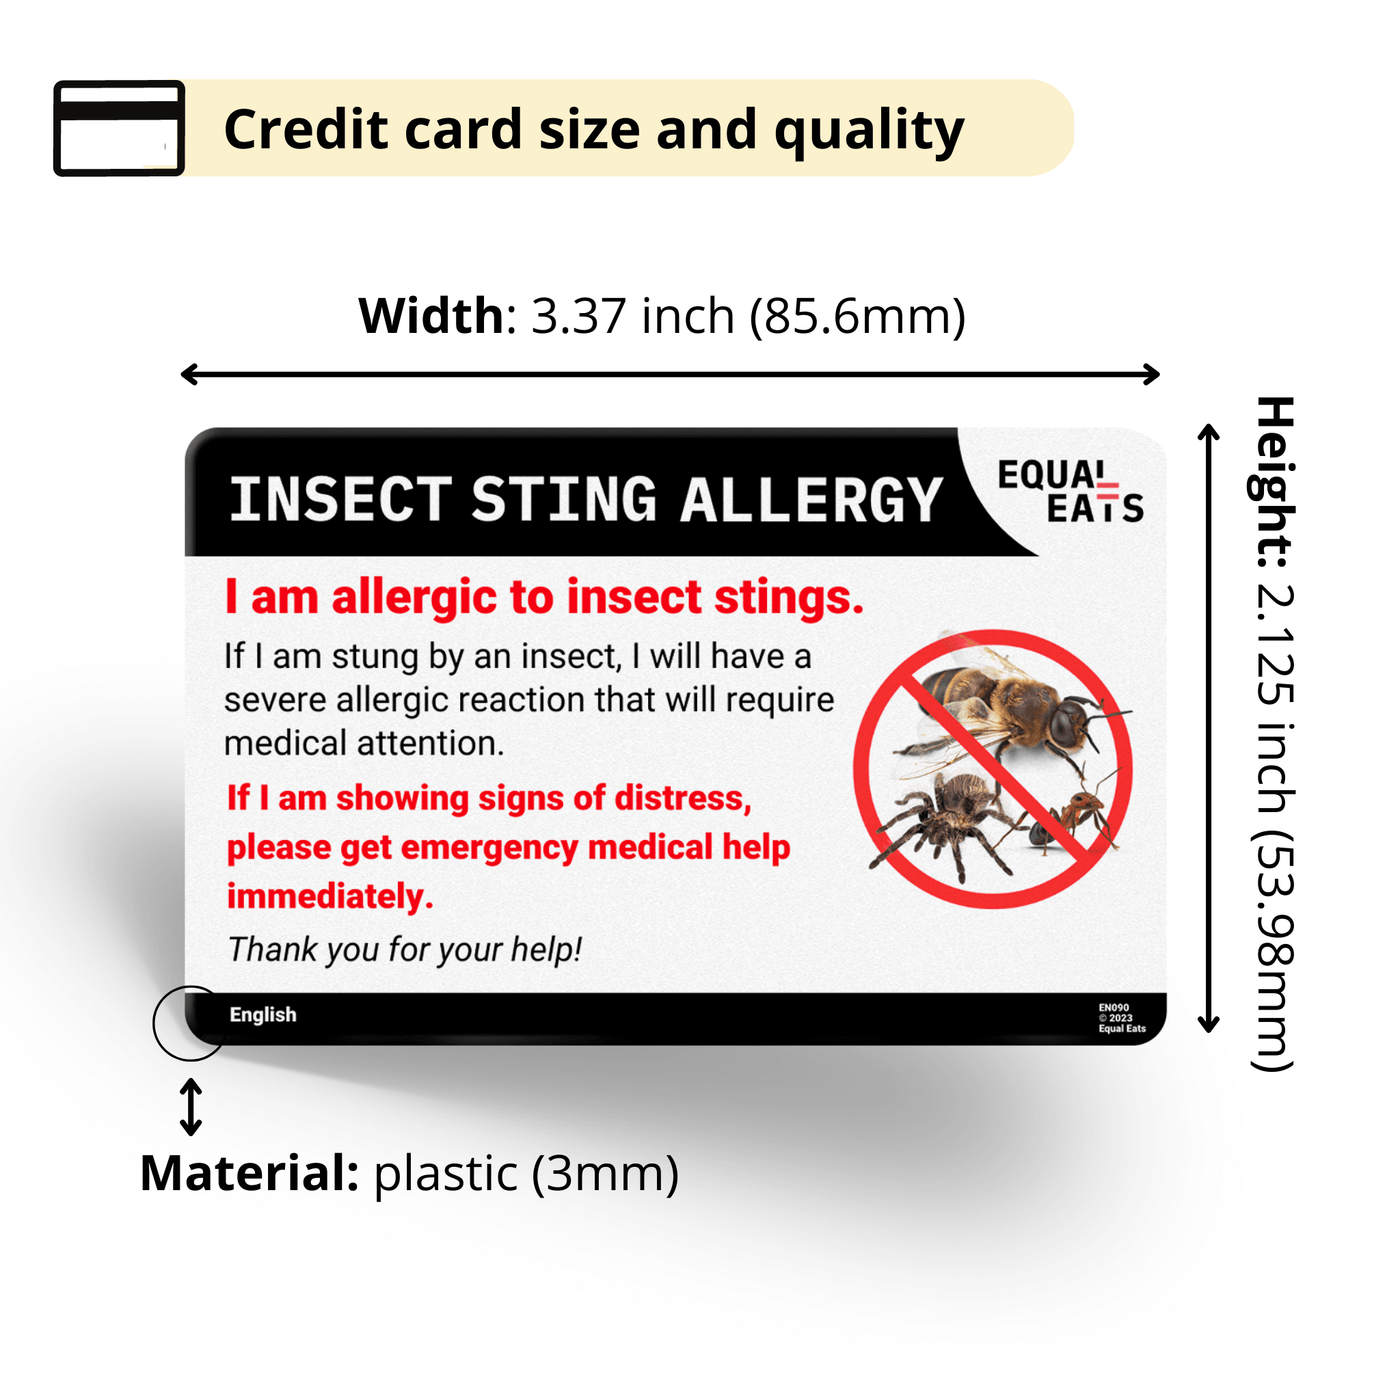 Slovenian Insect Sting Allergy Card